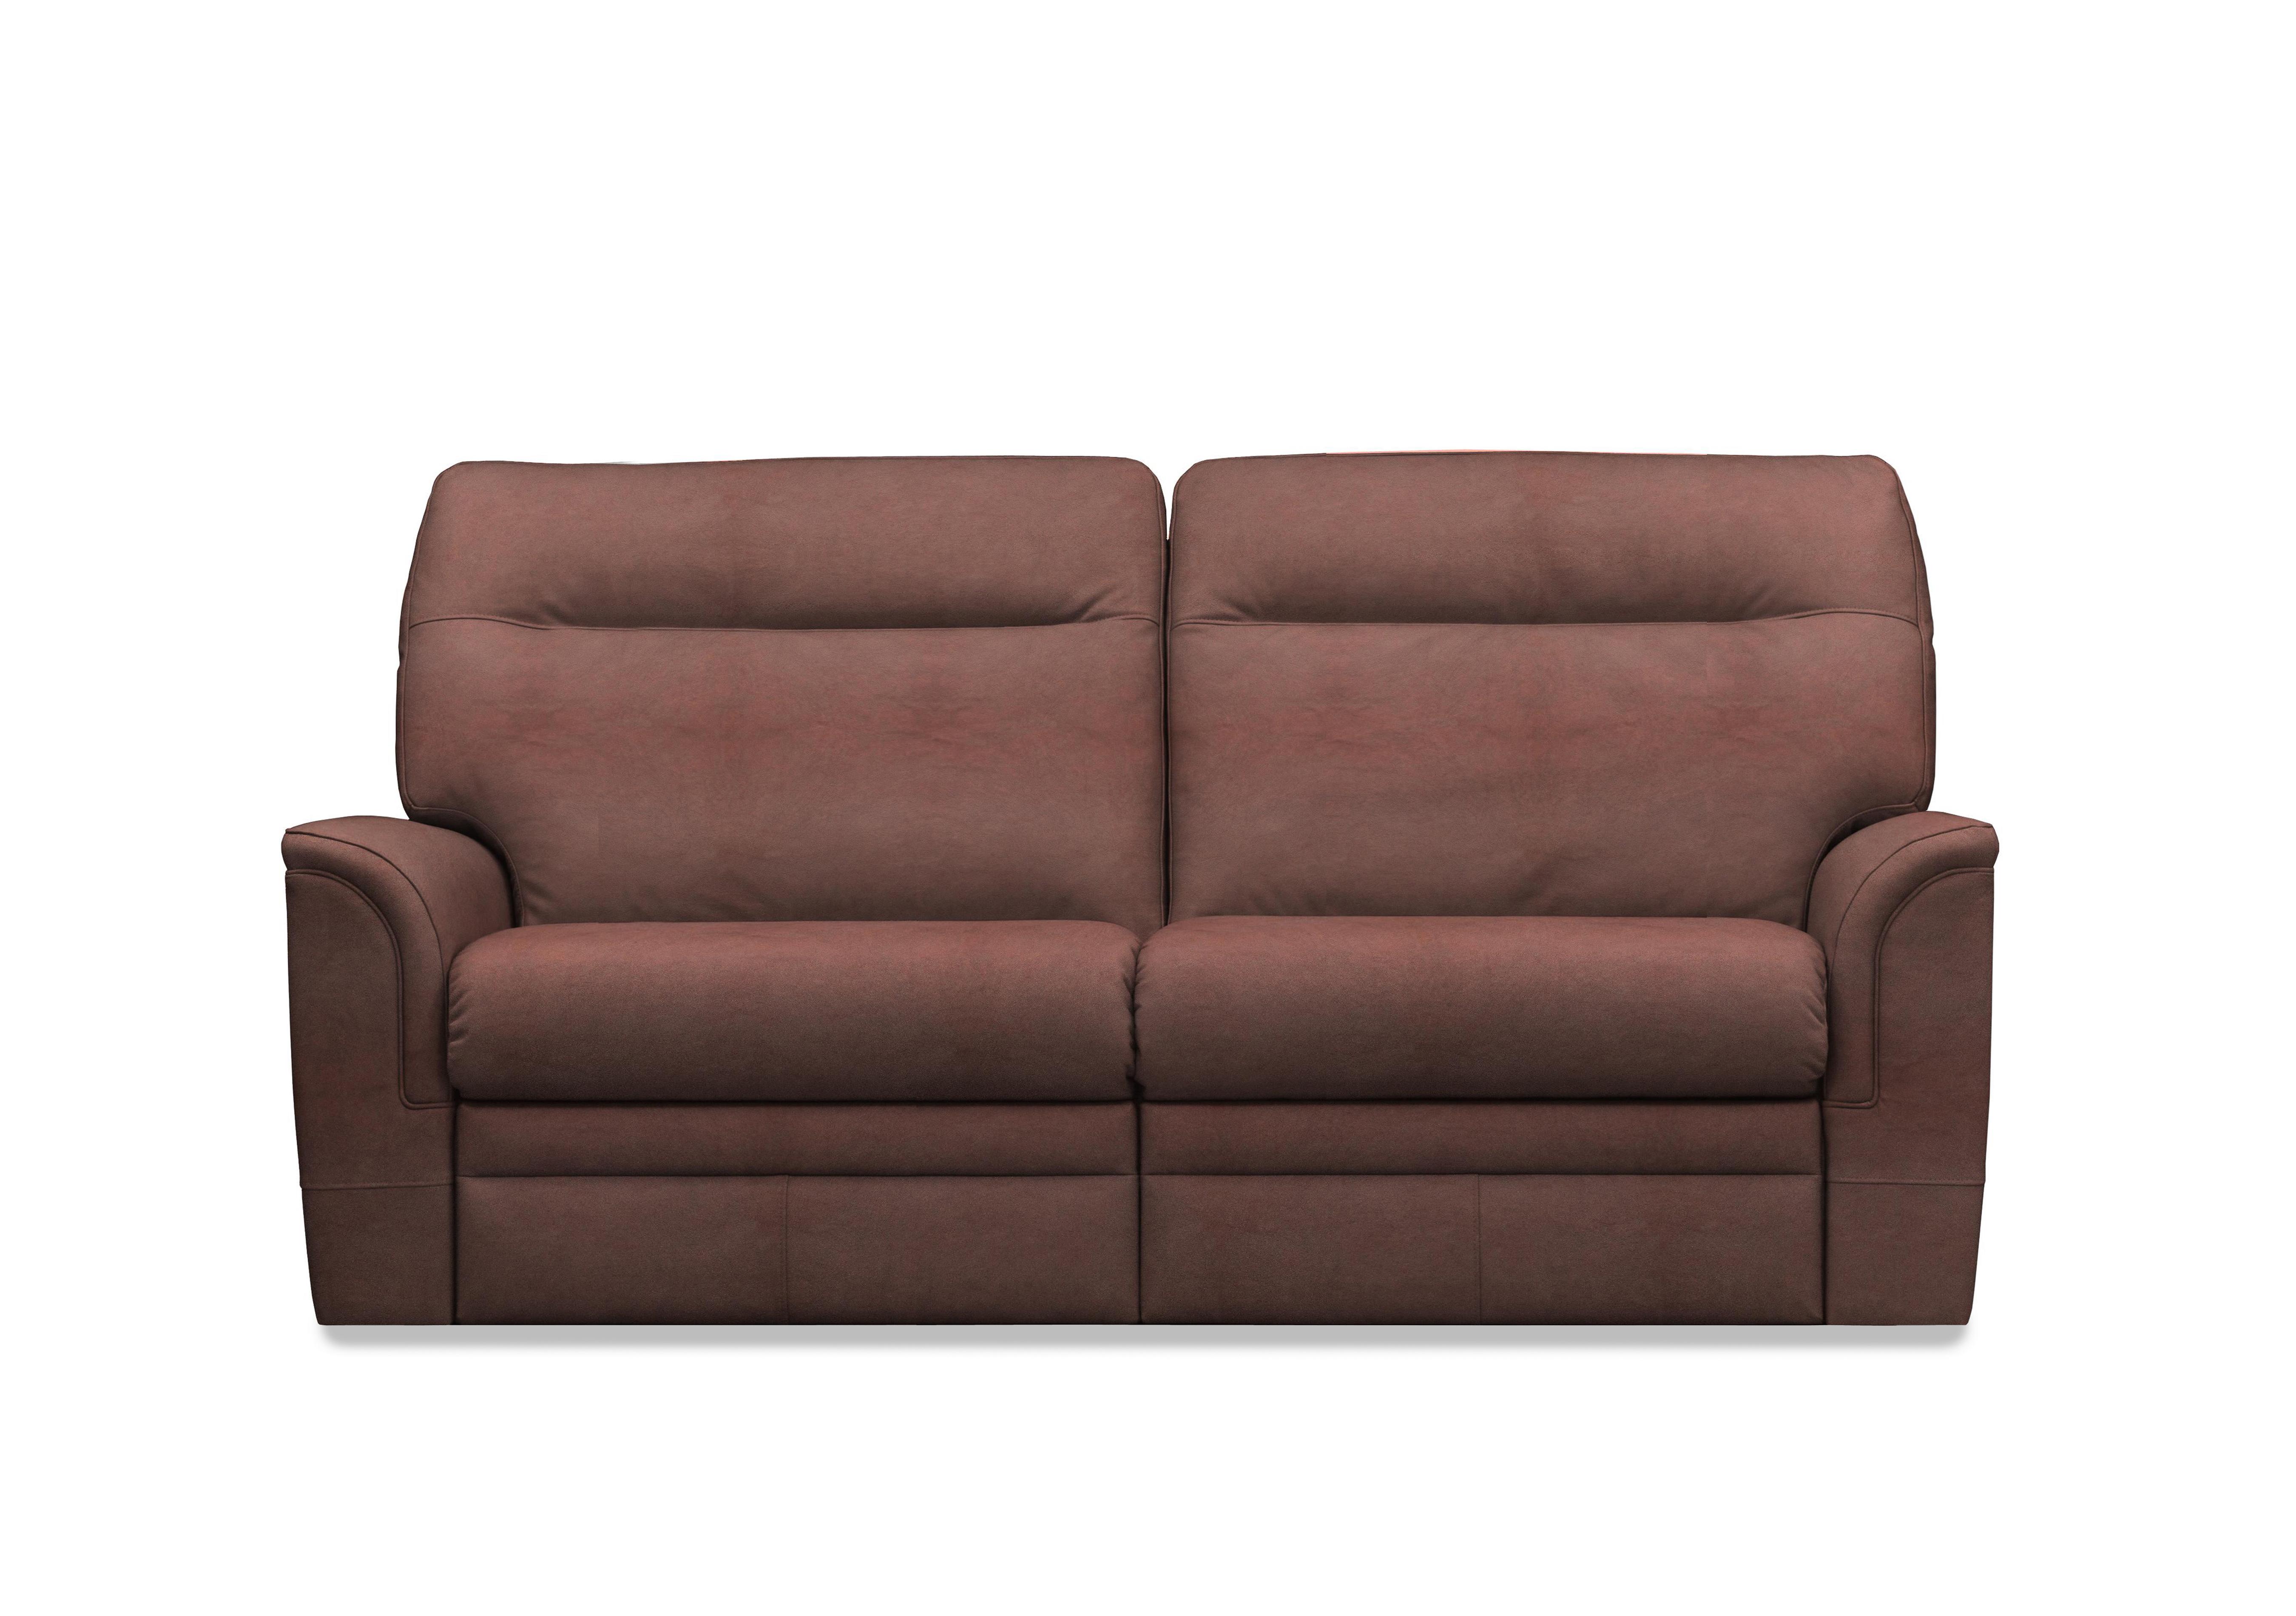 Hudson 23 Large 2 Seater Leather Sofa in Revolution Chocolate 009027-00 on Furniture Village